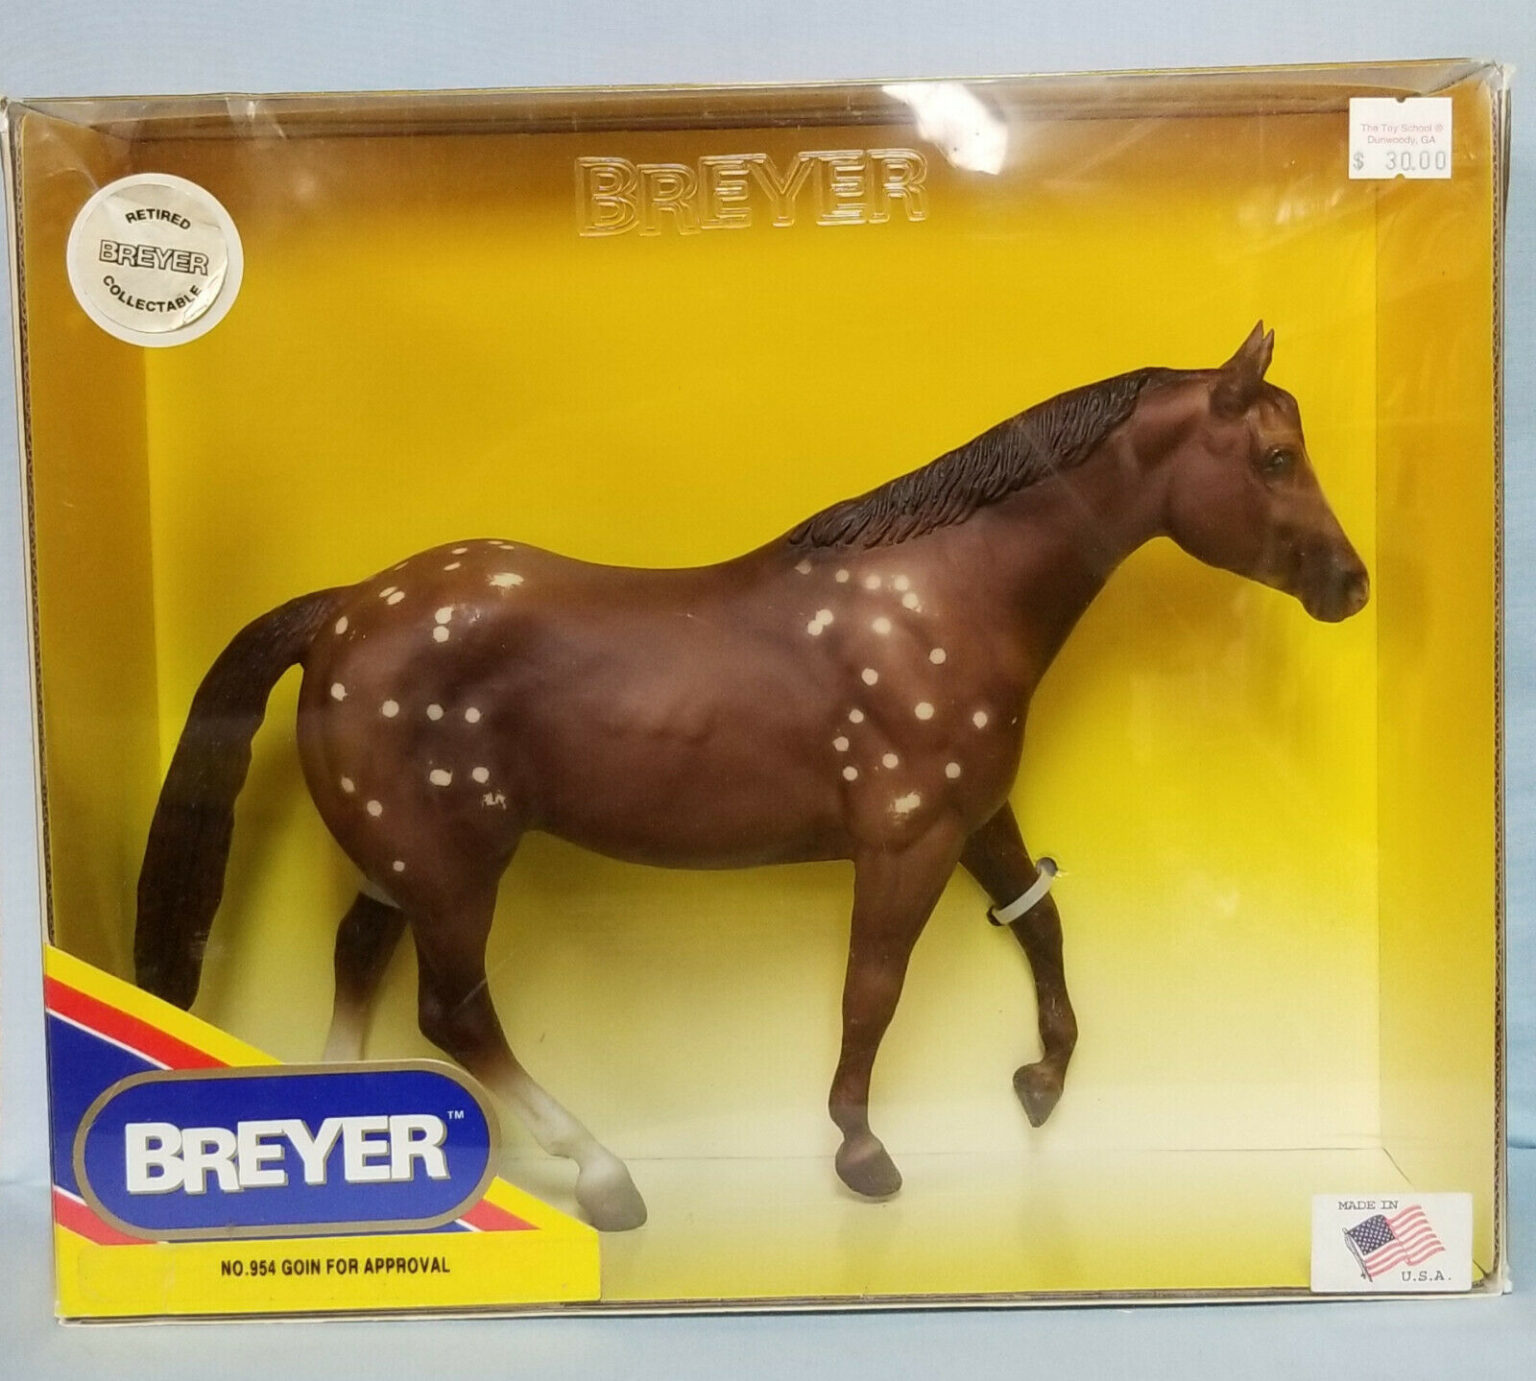 diffrence bet soft breyer and hard